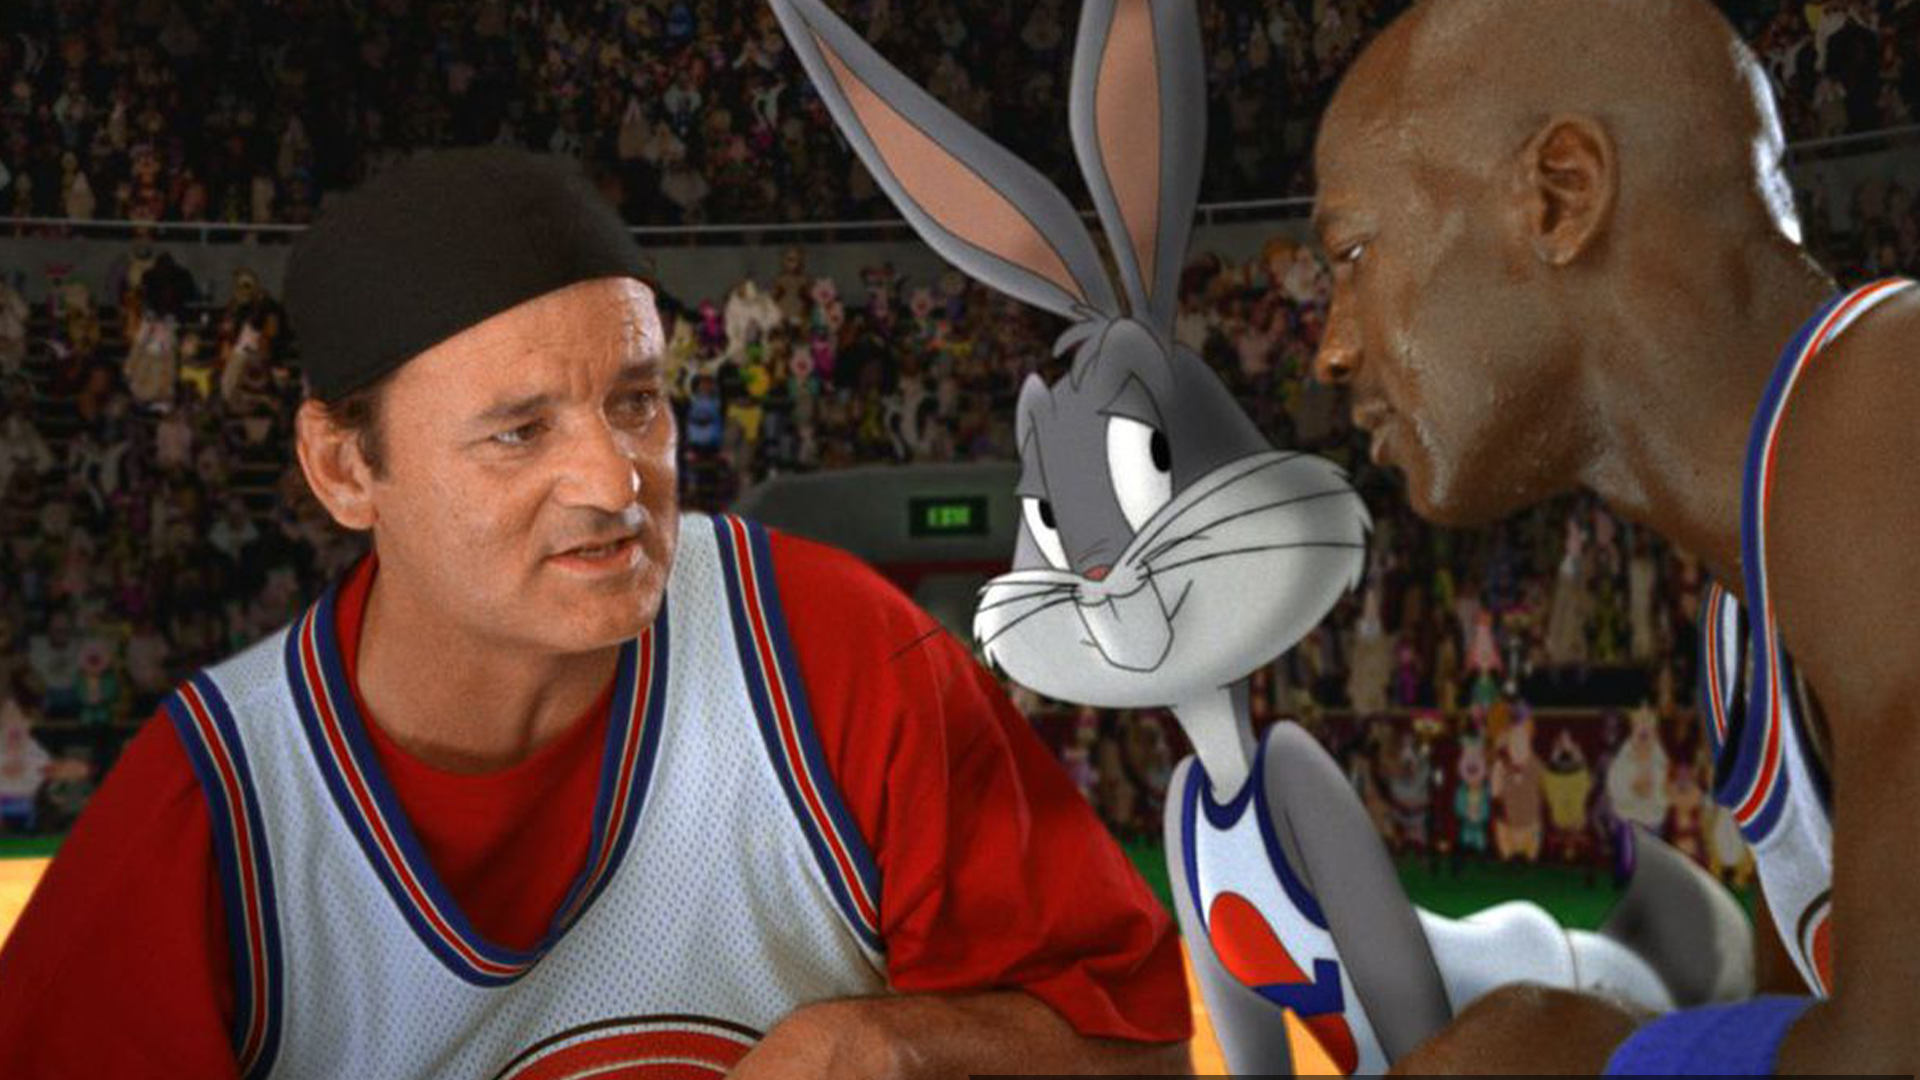 Bugs bunny and mystery man who is top of the Bill